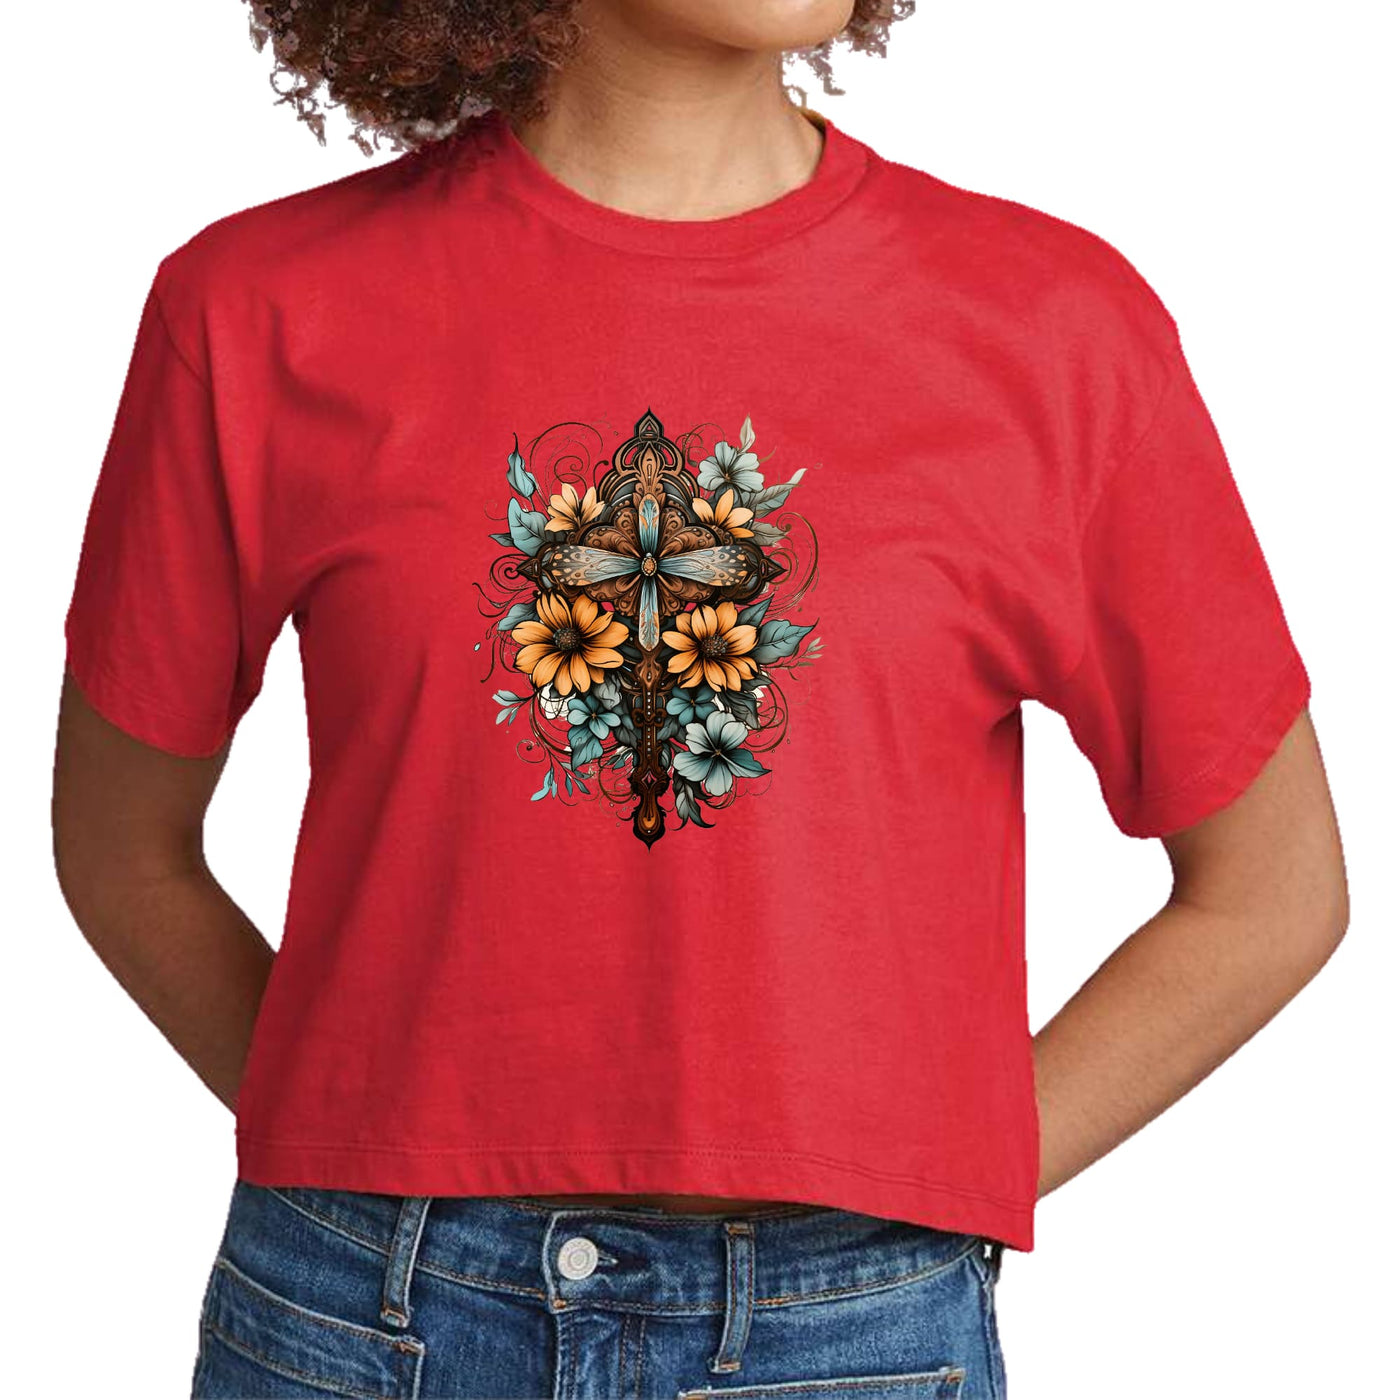 Womens Cropped Graphic T-shirt Christian Cross Floral Bouquet Brown - Womens